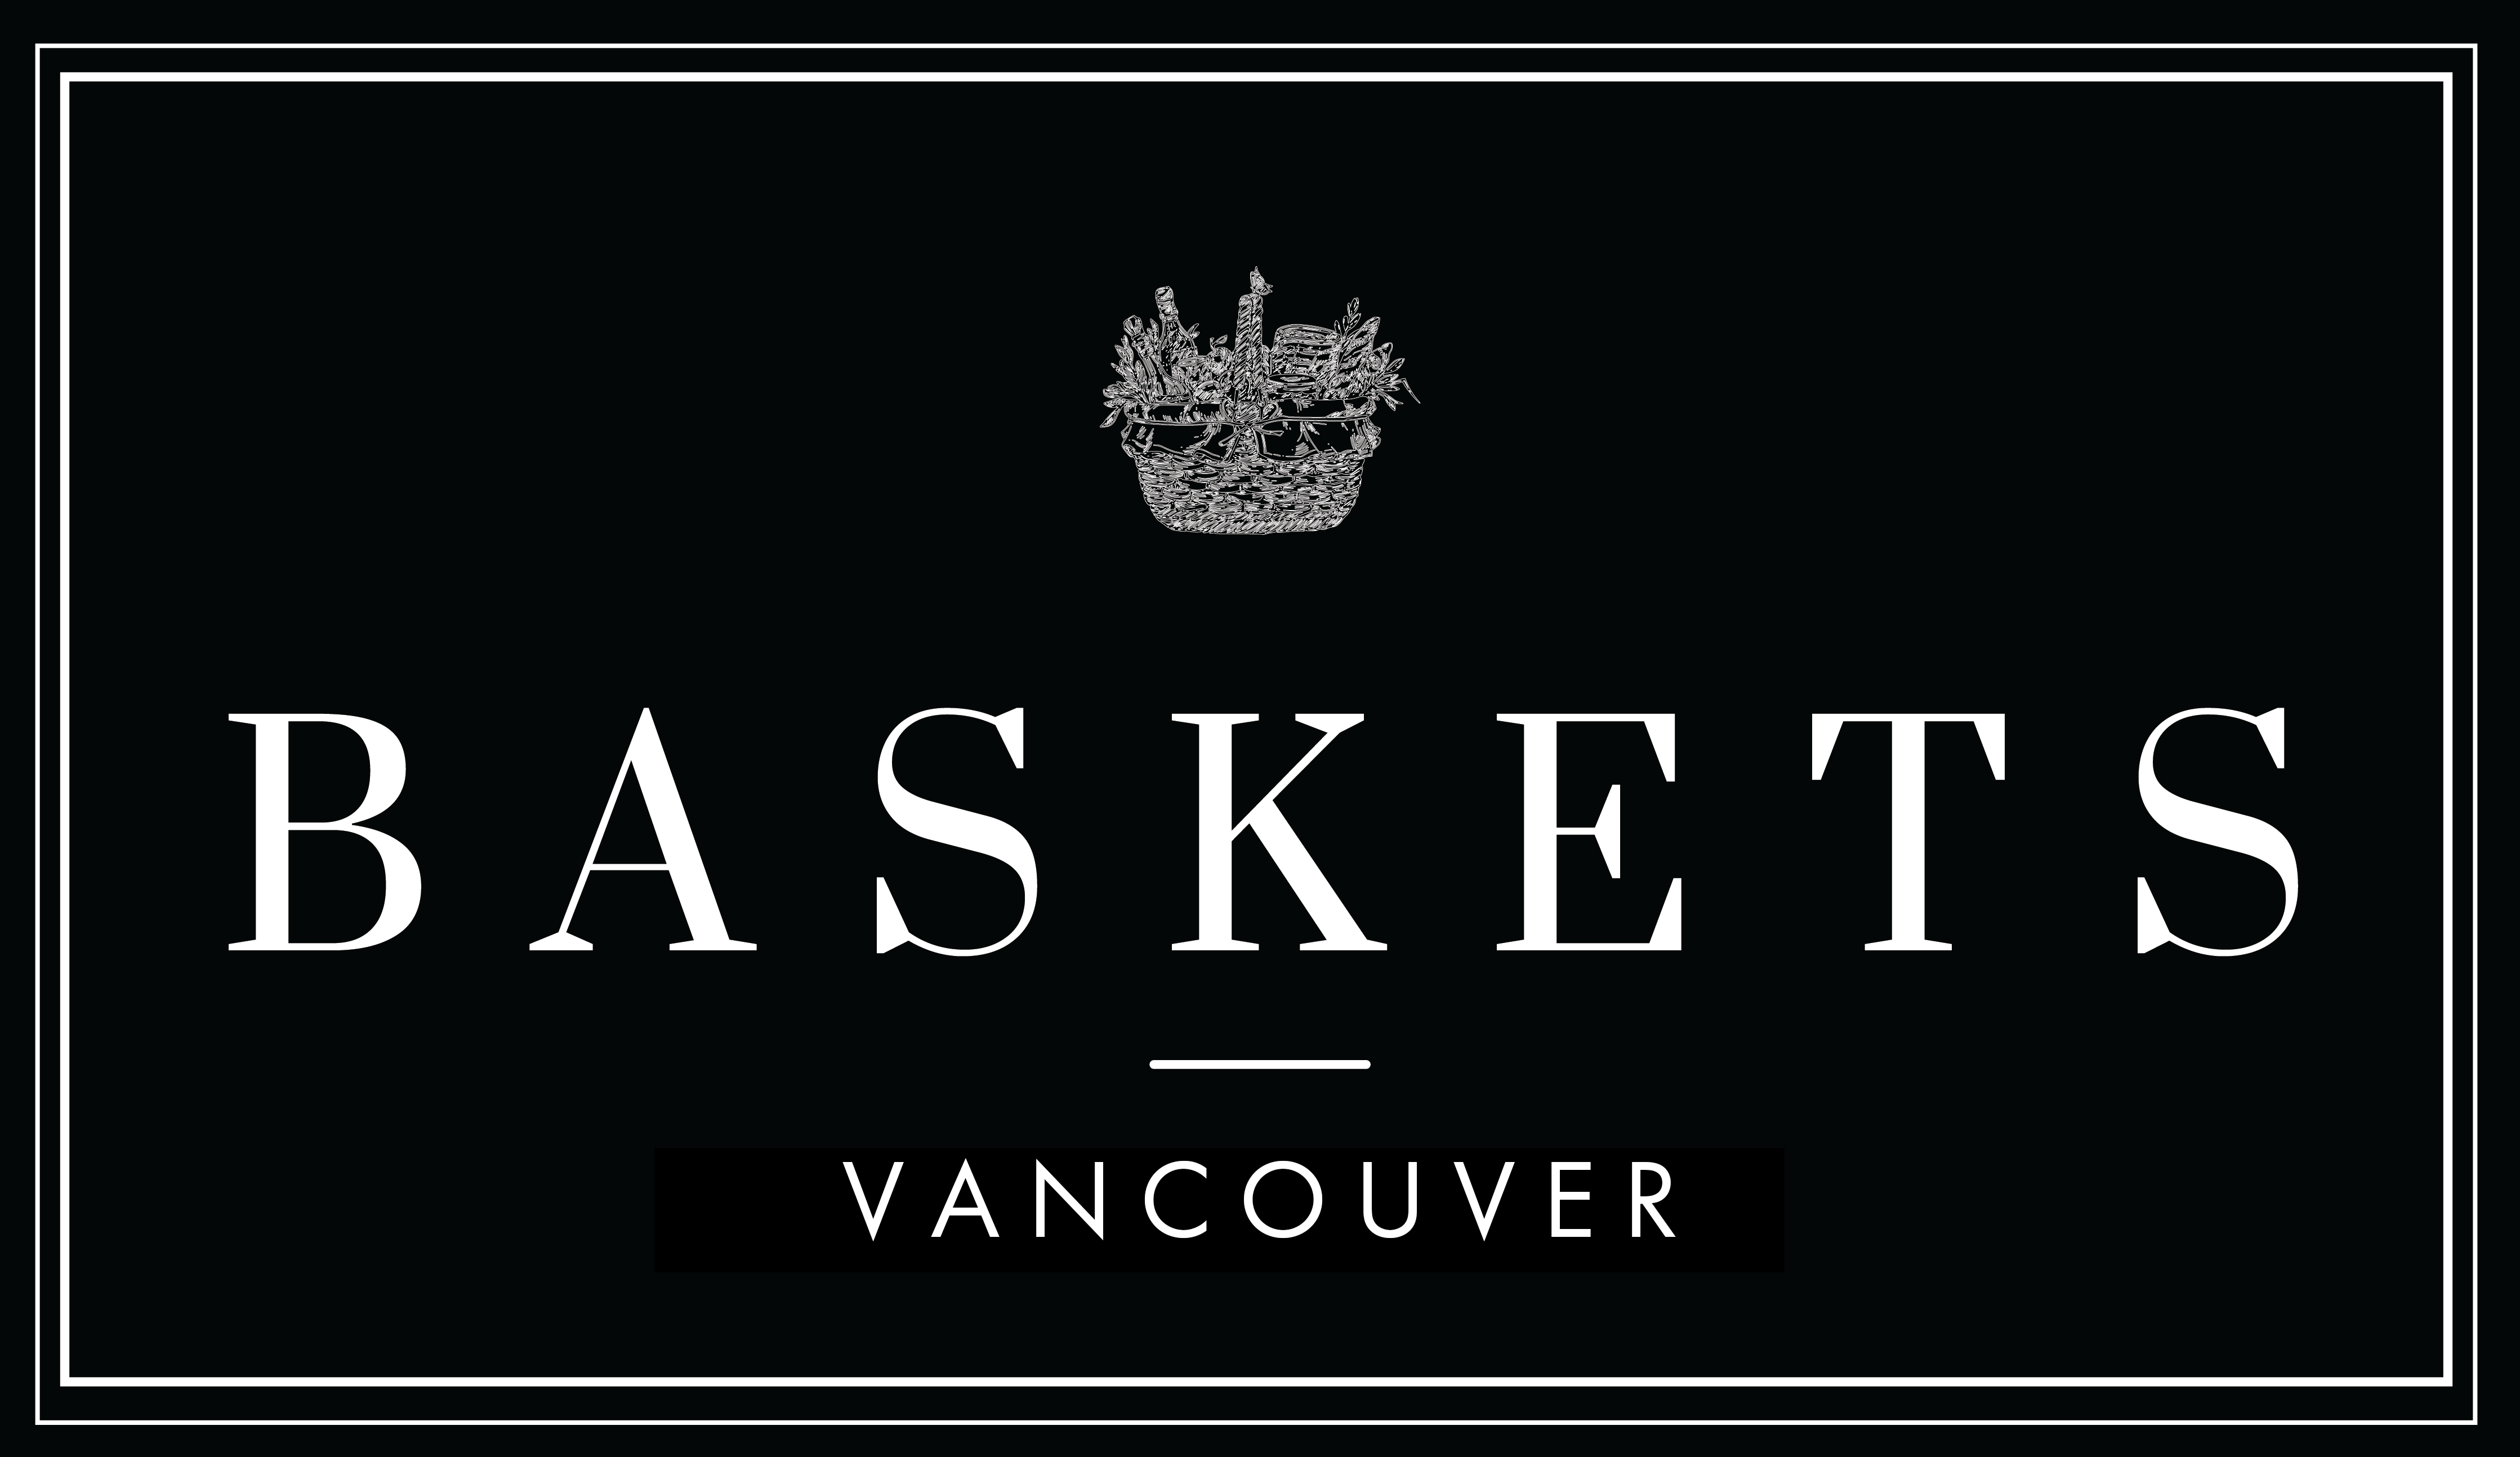 VANCOUVER GIFT BASKETS | CANADA